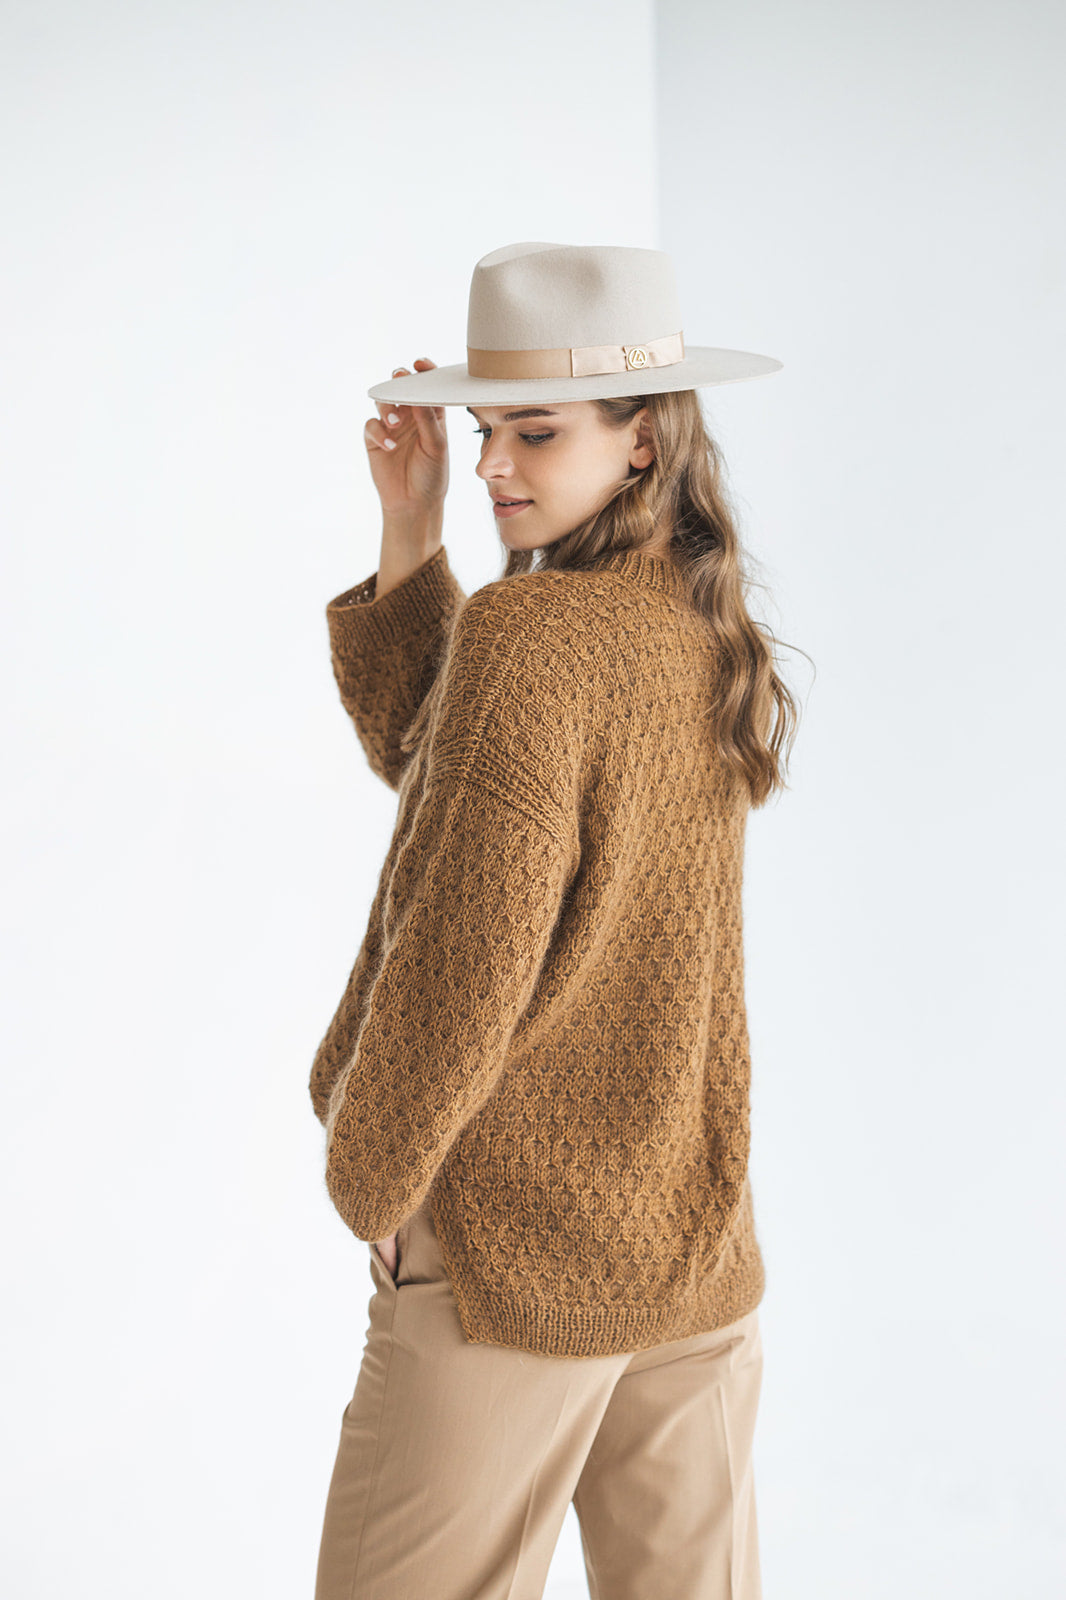 Brown mohair cable knitted thick fluffy sweater, wide sleeves, cinnamon beige longer back alpaca wool jumper, fuzzy oversized knit pullover